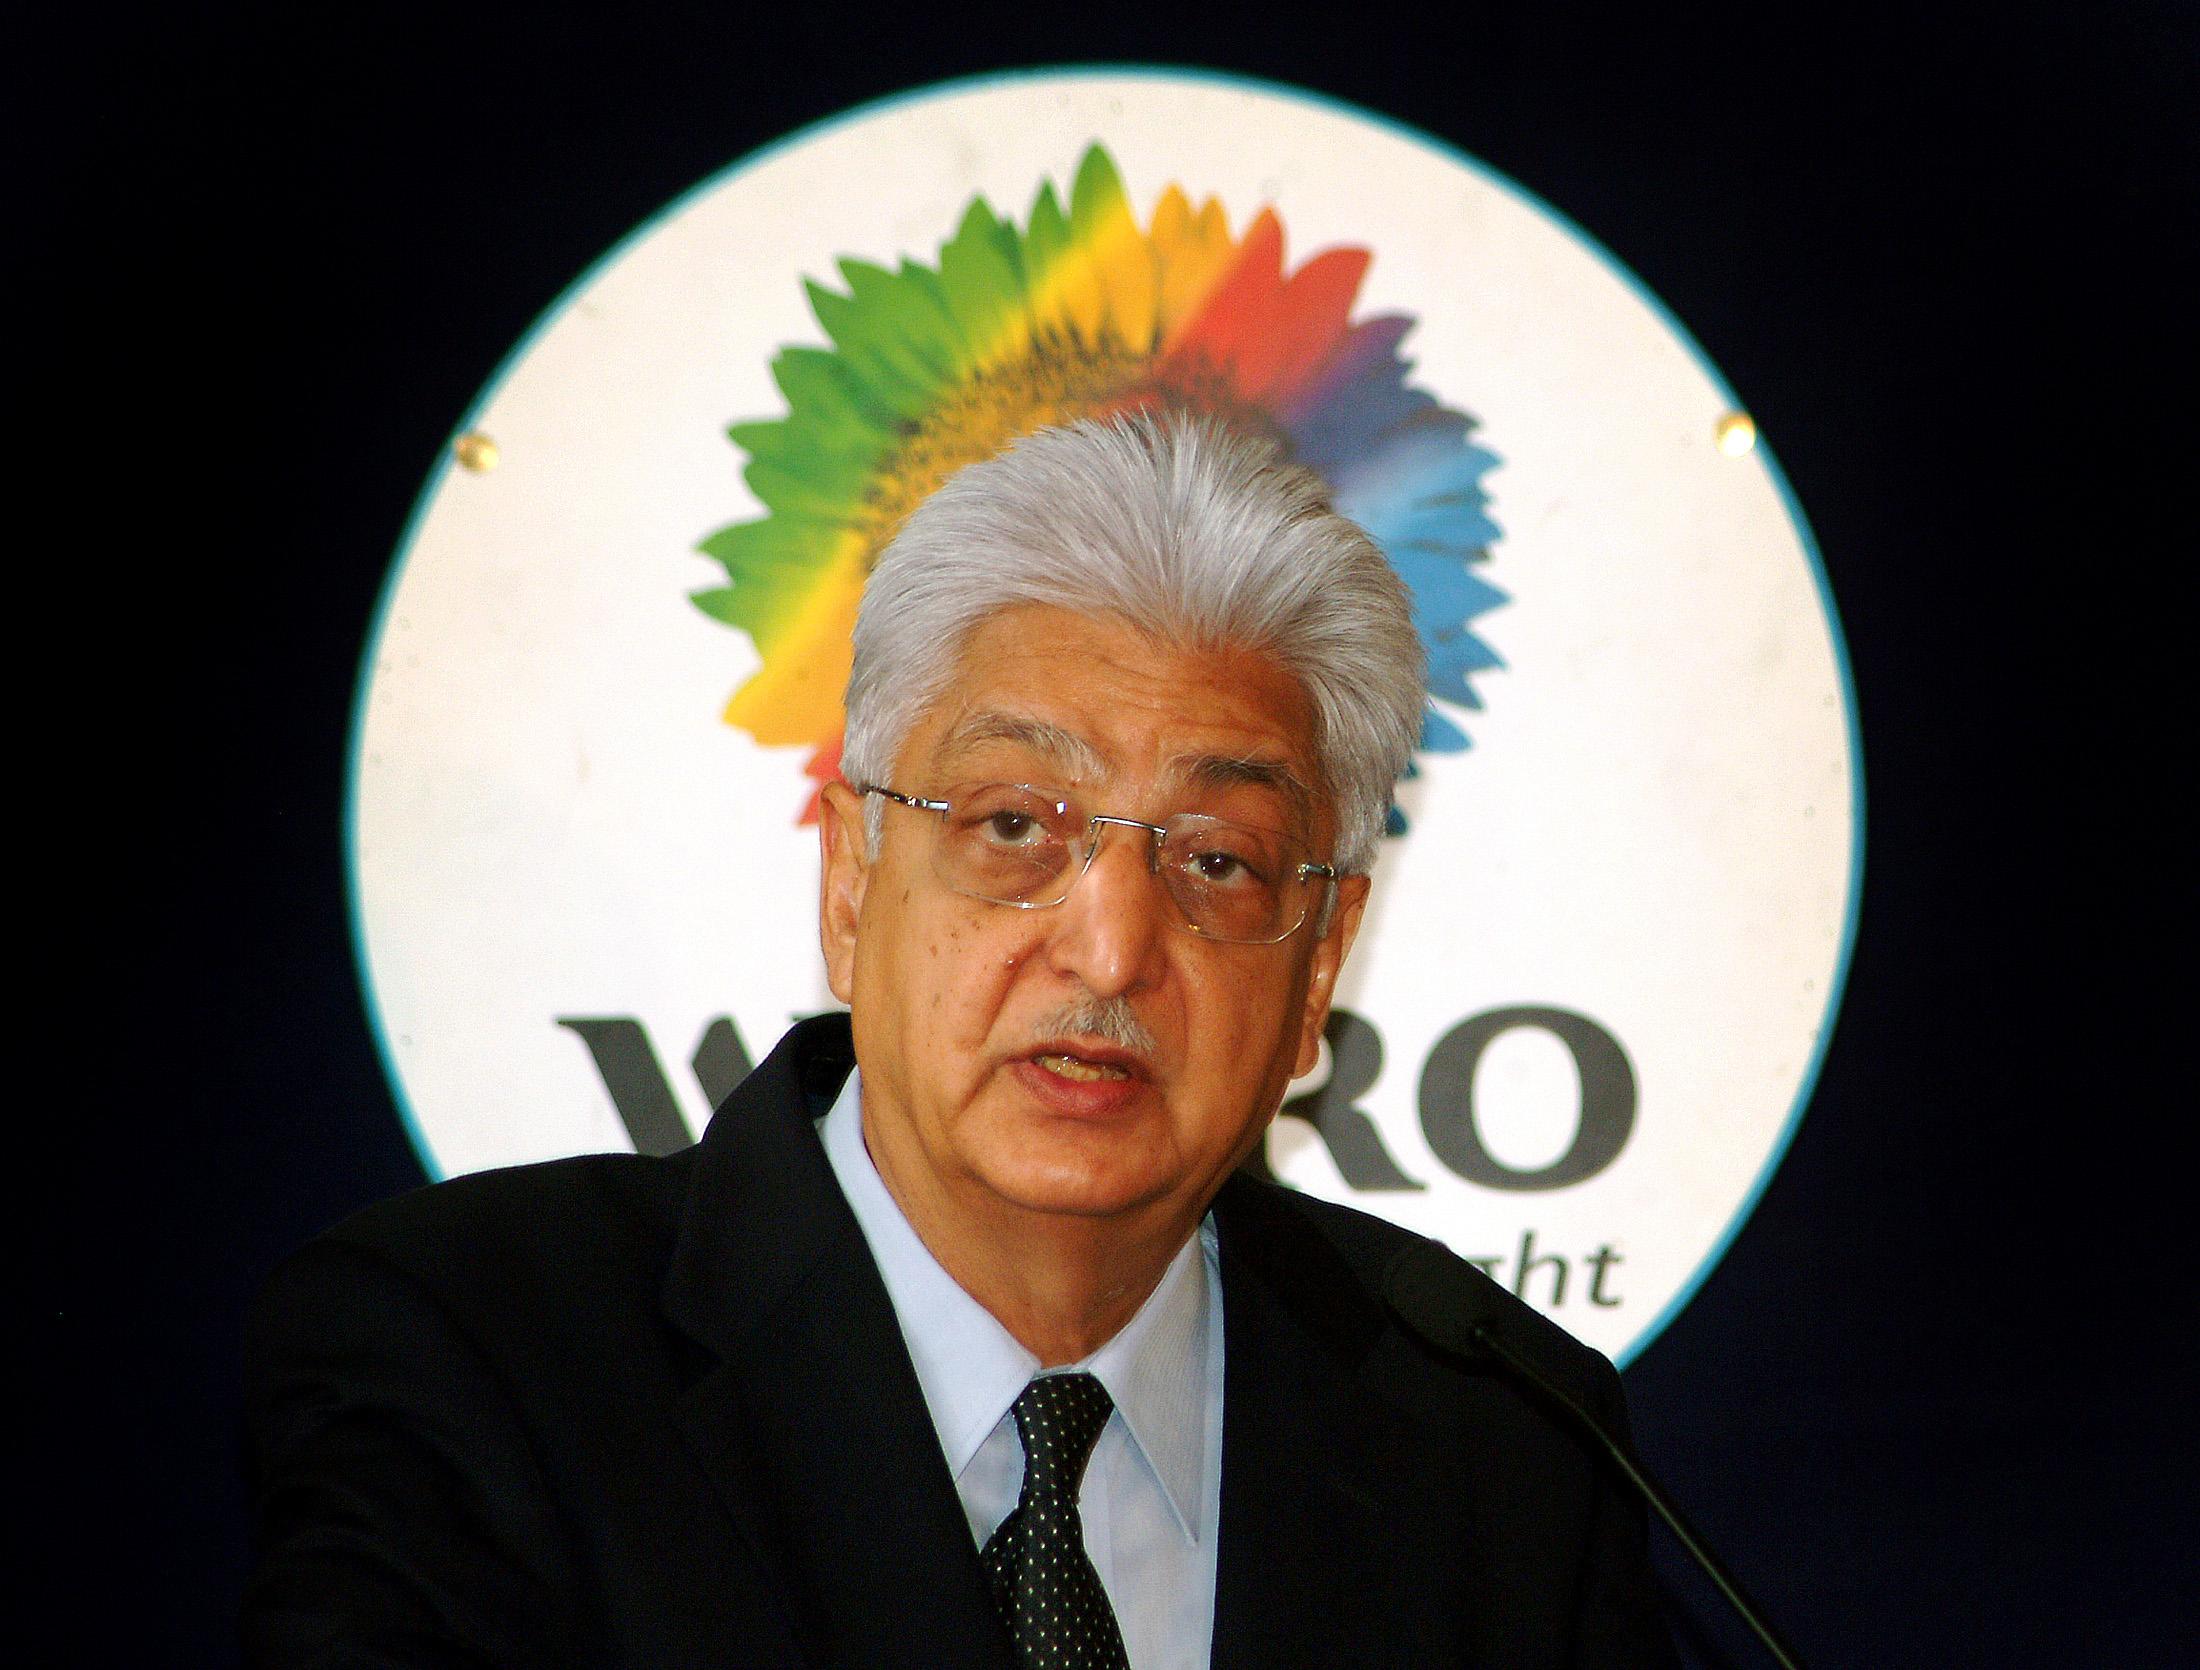 Wipro Benefit Trust sells shares worth over Rs 100Cr